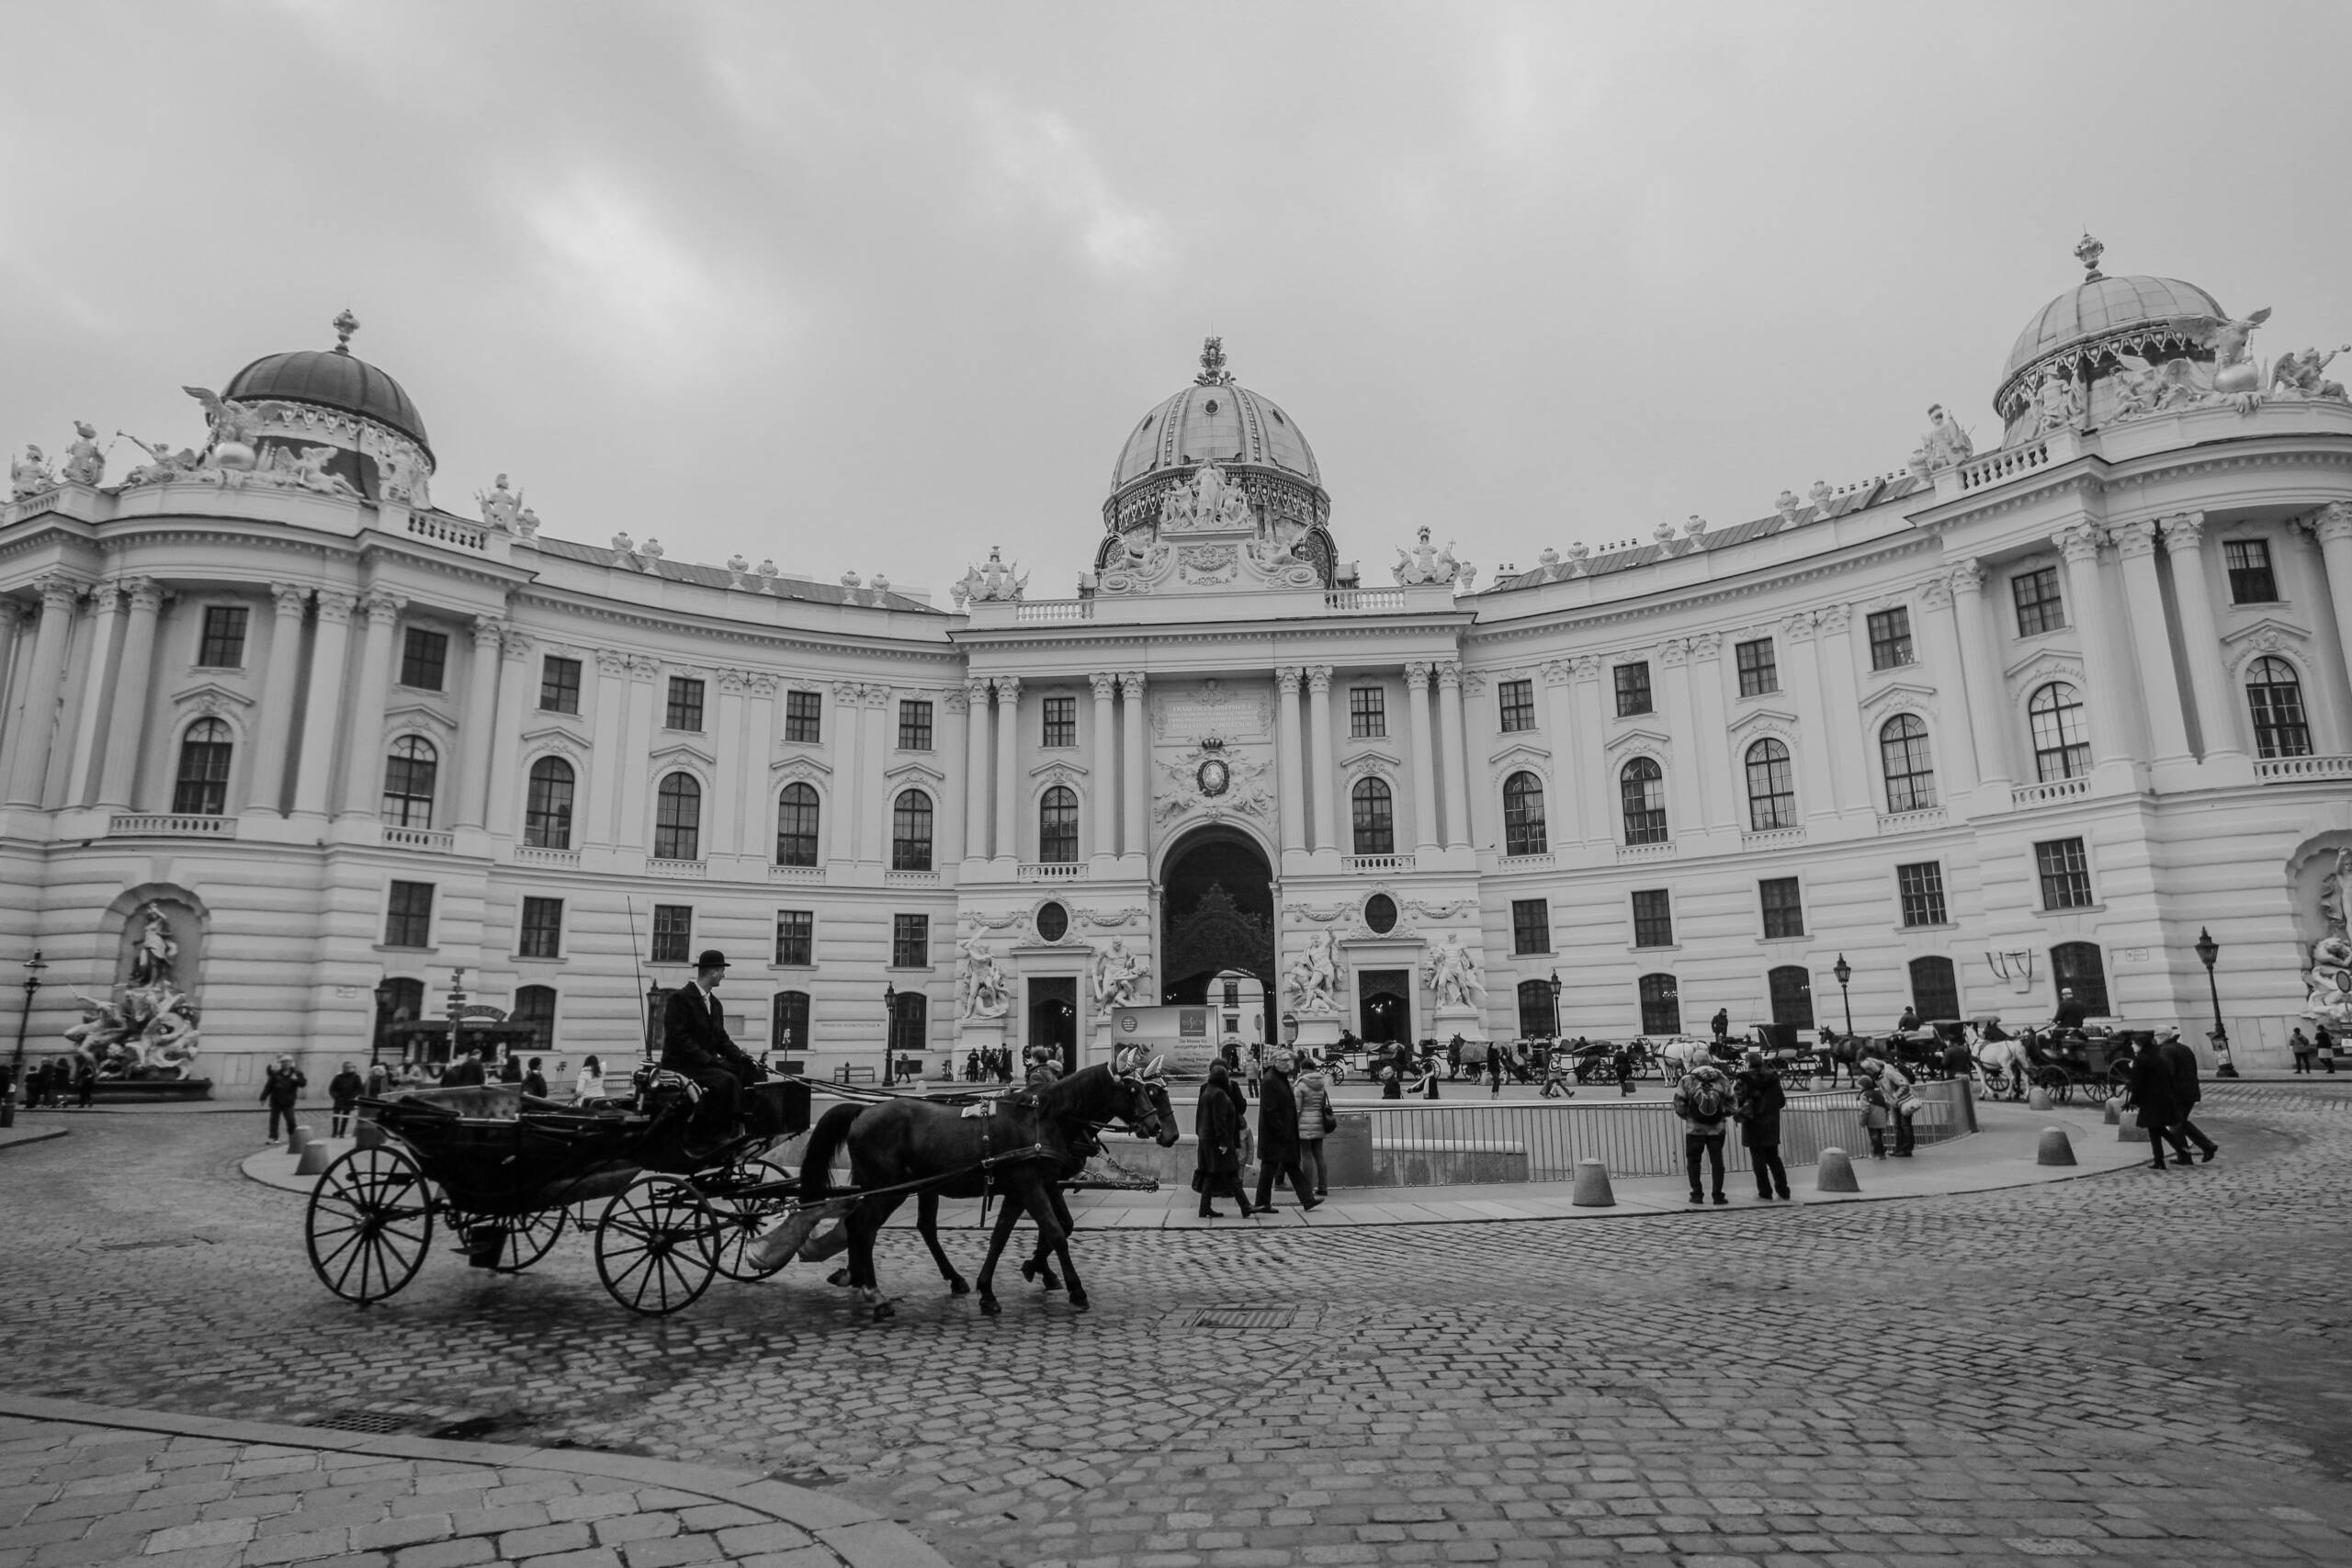 Hofburg Palace, located in the heart of Vienna